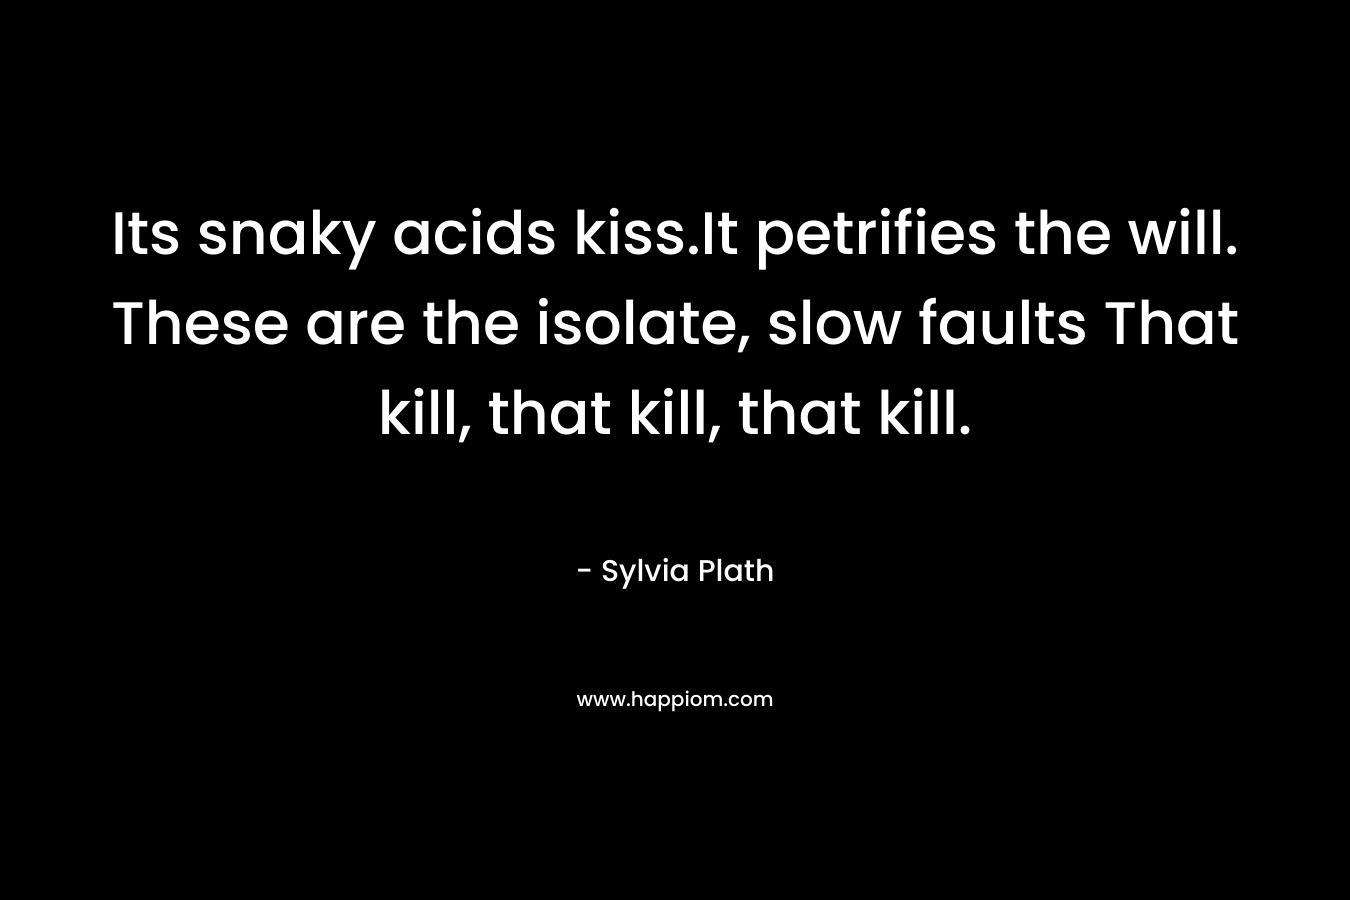 Its snaky acids kiss.It petrifies the will. These are the isolate, slow faults That kill, that kill, that kill. – Sylvia Plath